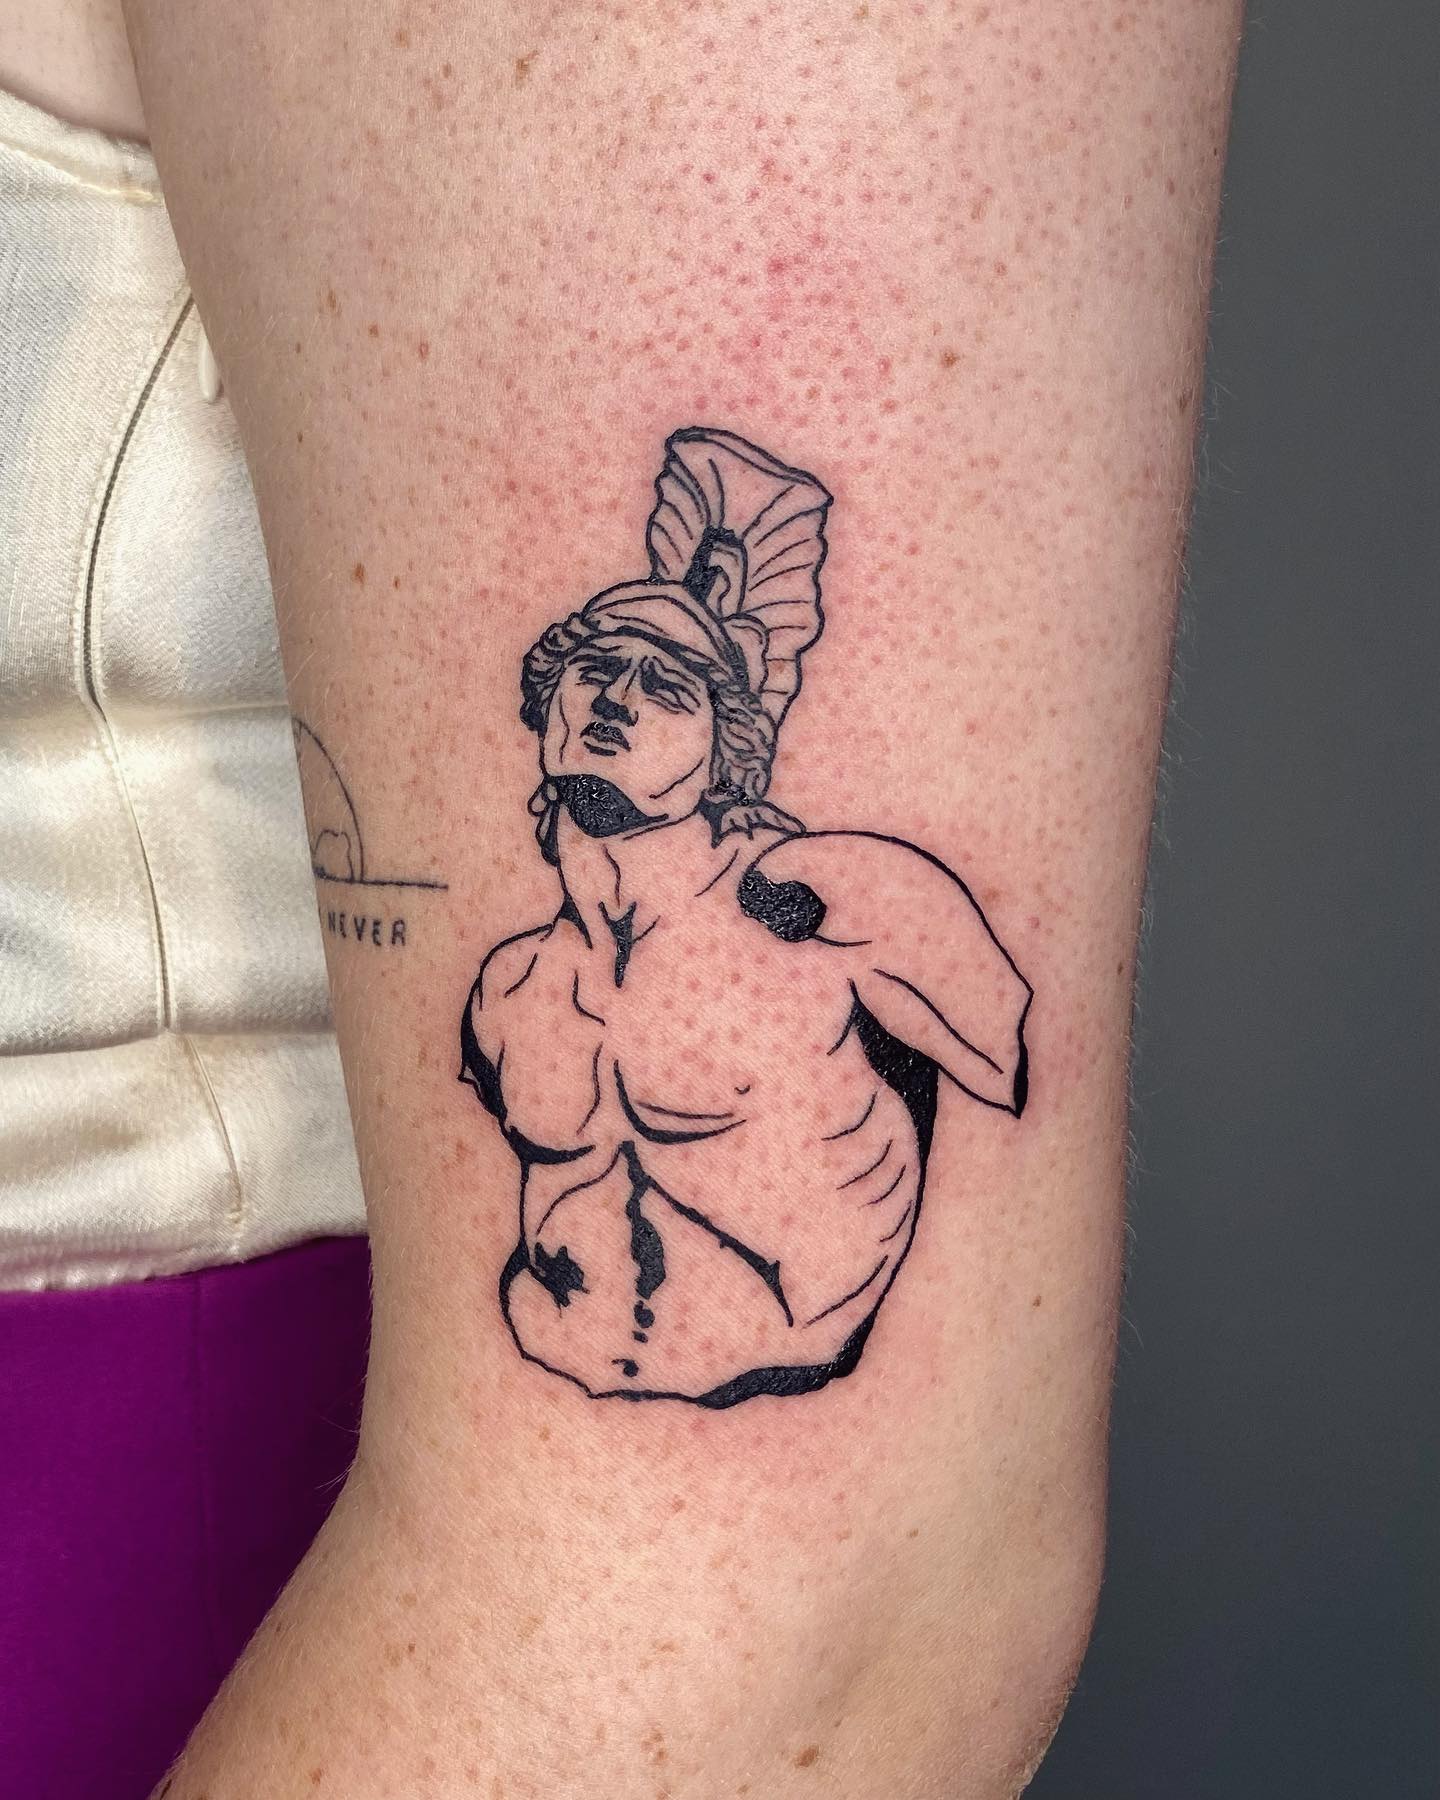 The son of Thetis, Achilles, is a hero that you must get as a tattoo because of his power.